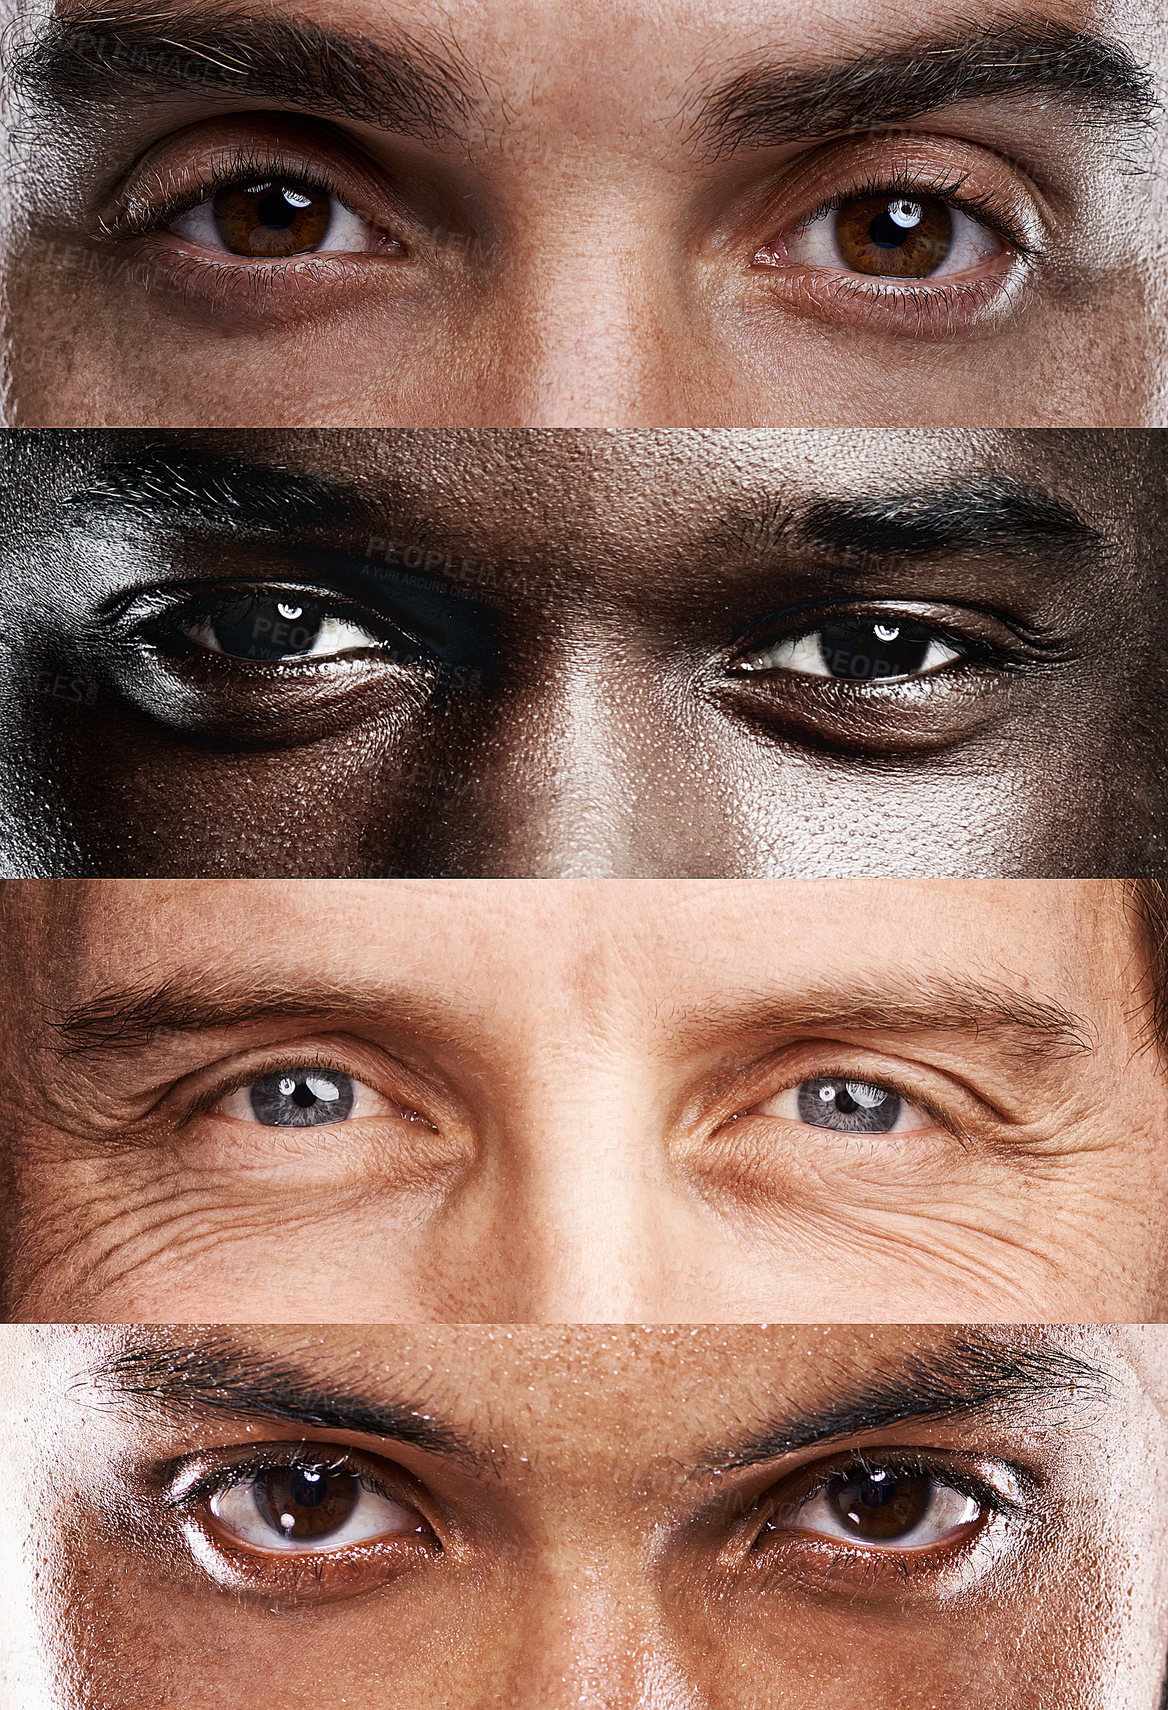 Buy stock photo A cropped view of four different nationalities of men's eyes